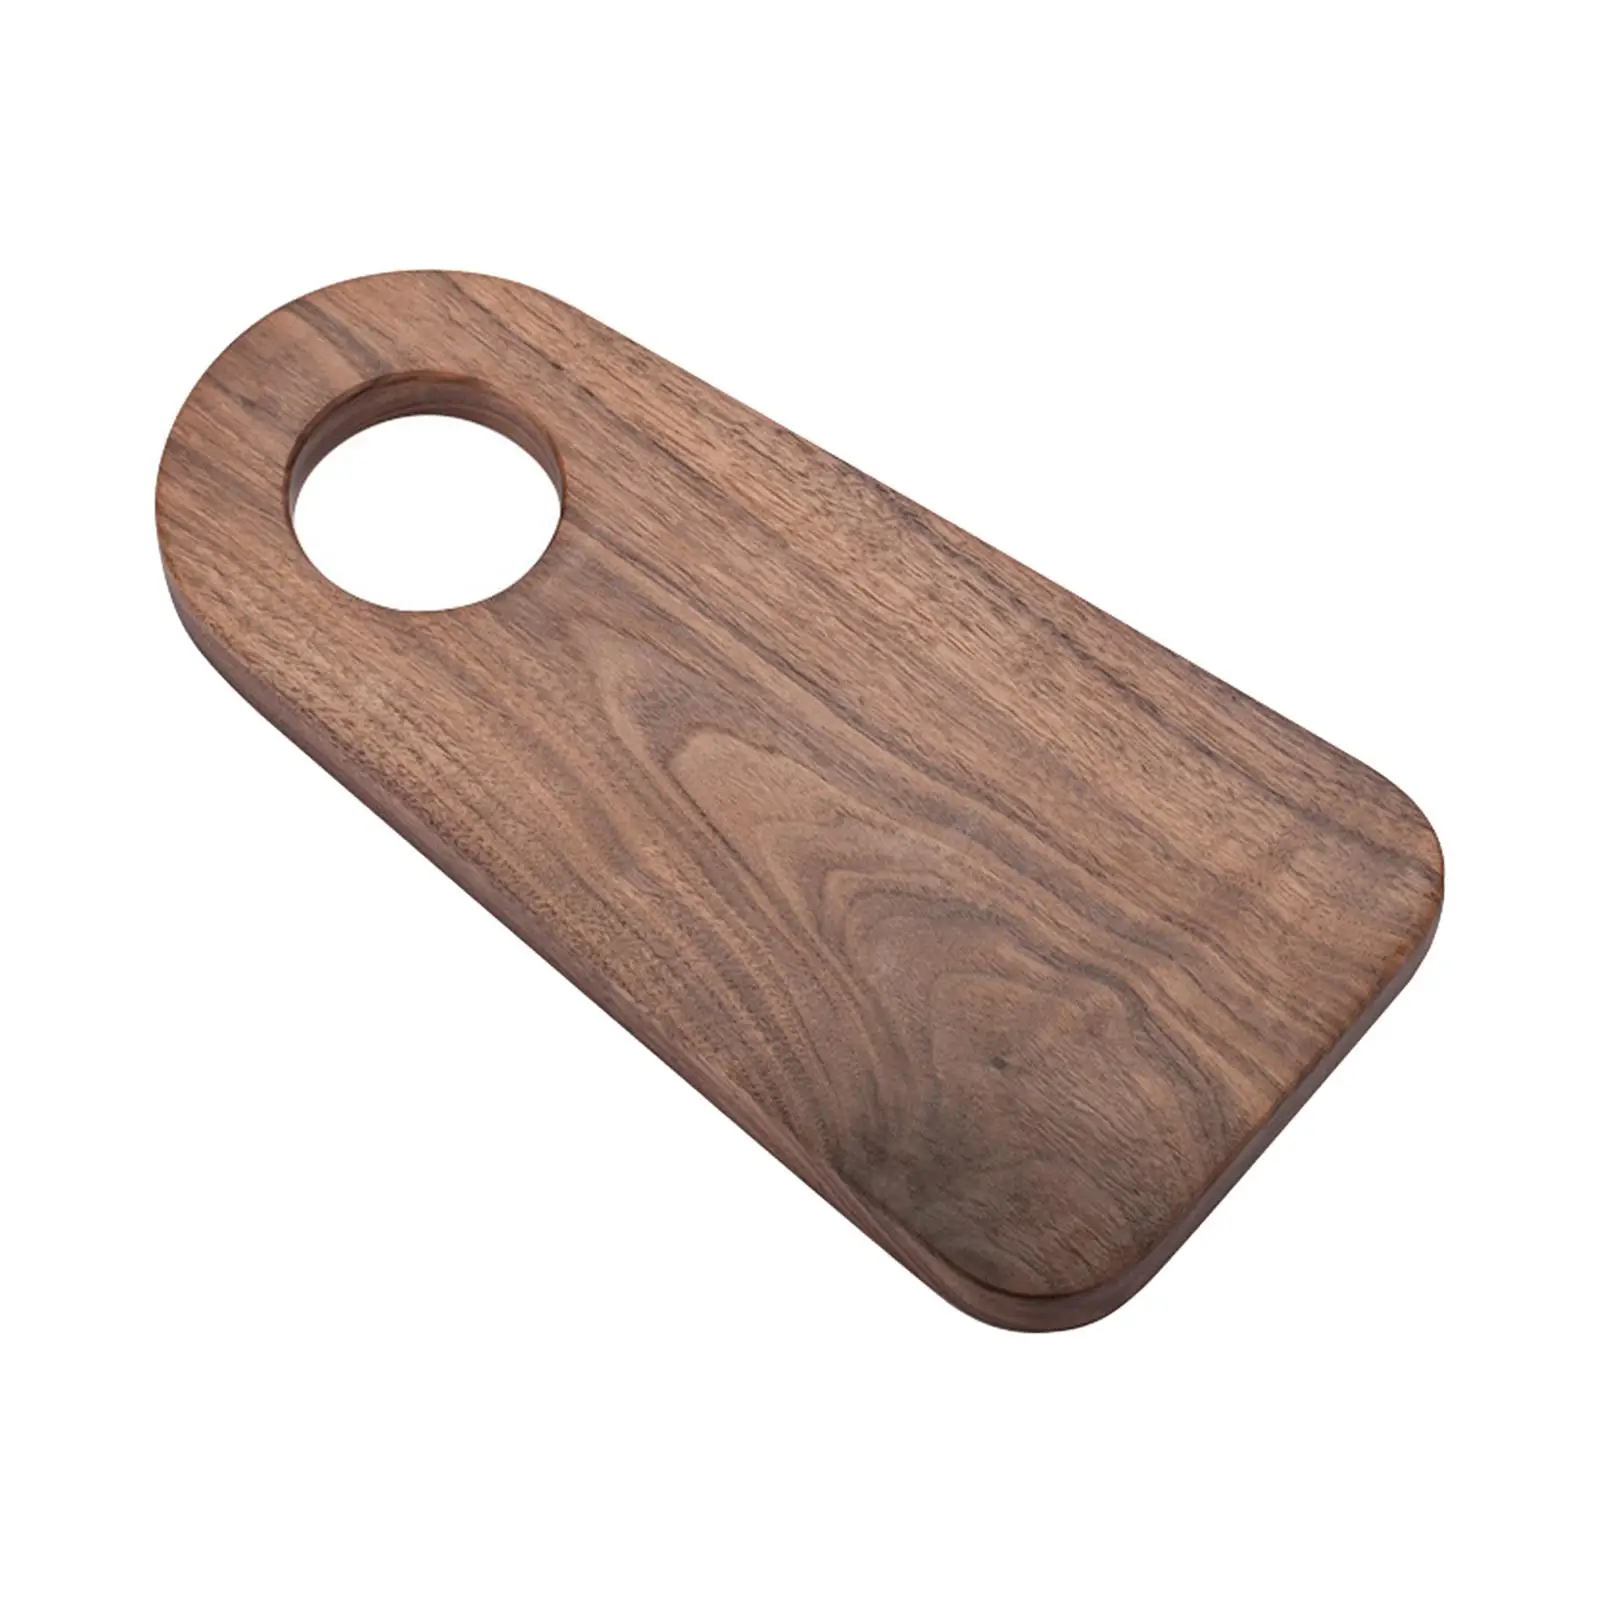 Wooden Cutting Board Kitchen Baking Tools with Handle Pizza Board Food Serving Tray Chopping Board for Steak Meat Fruits Pizza